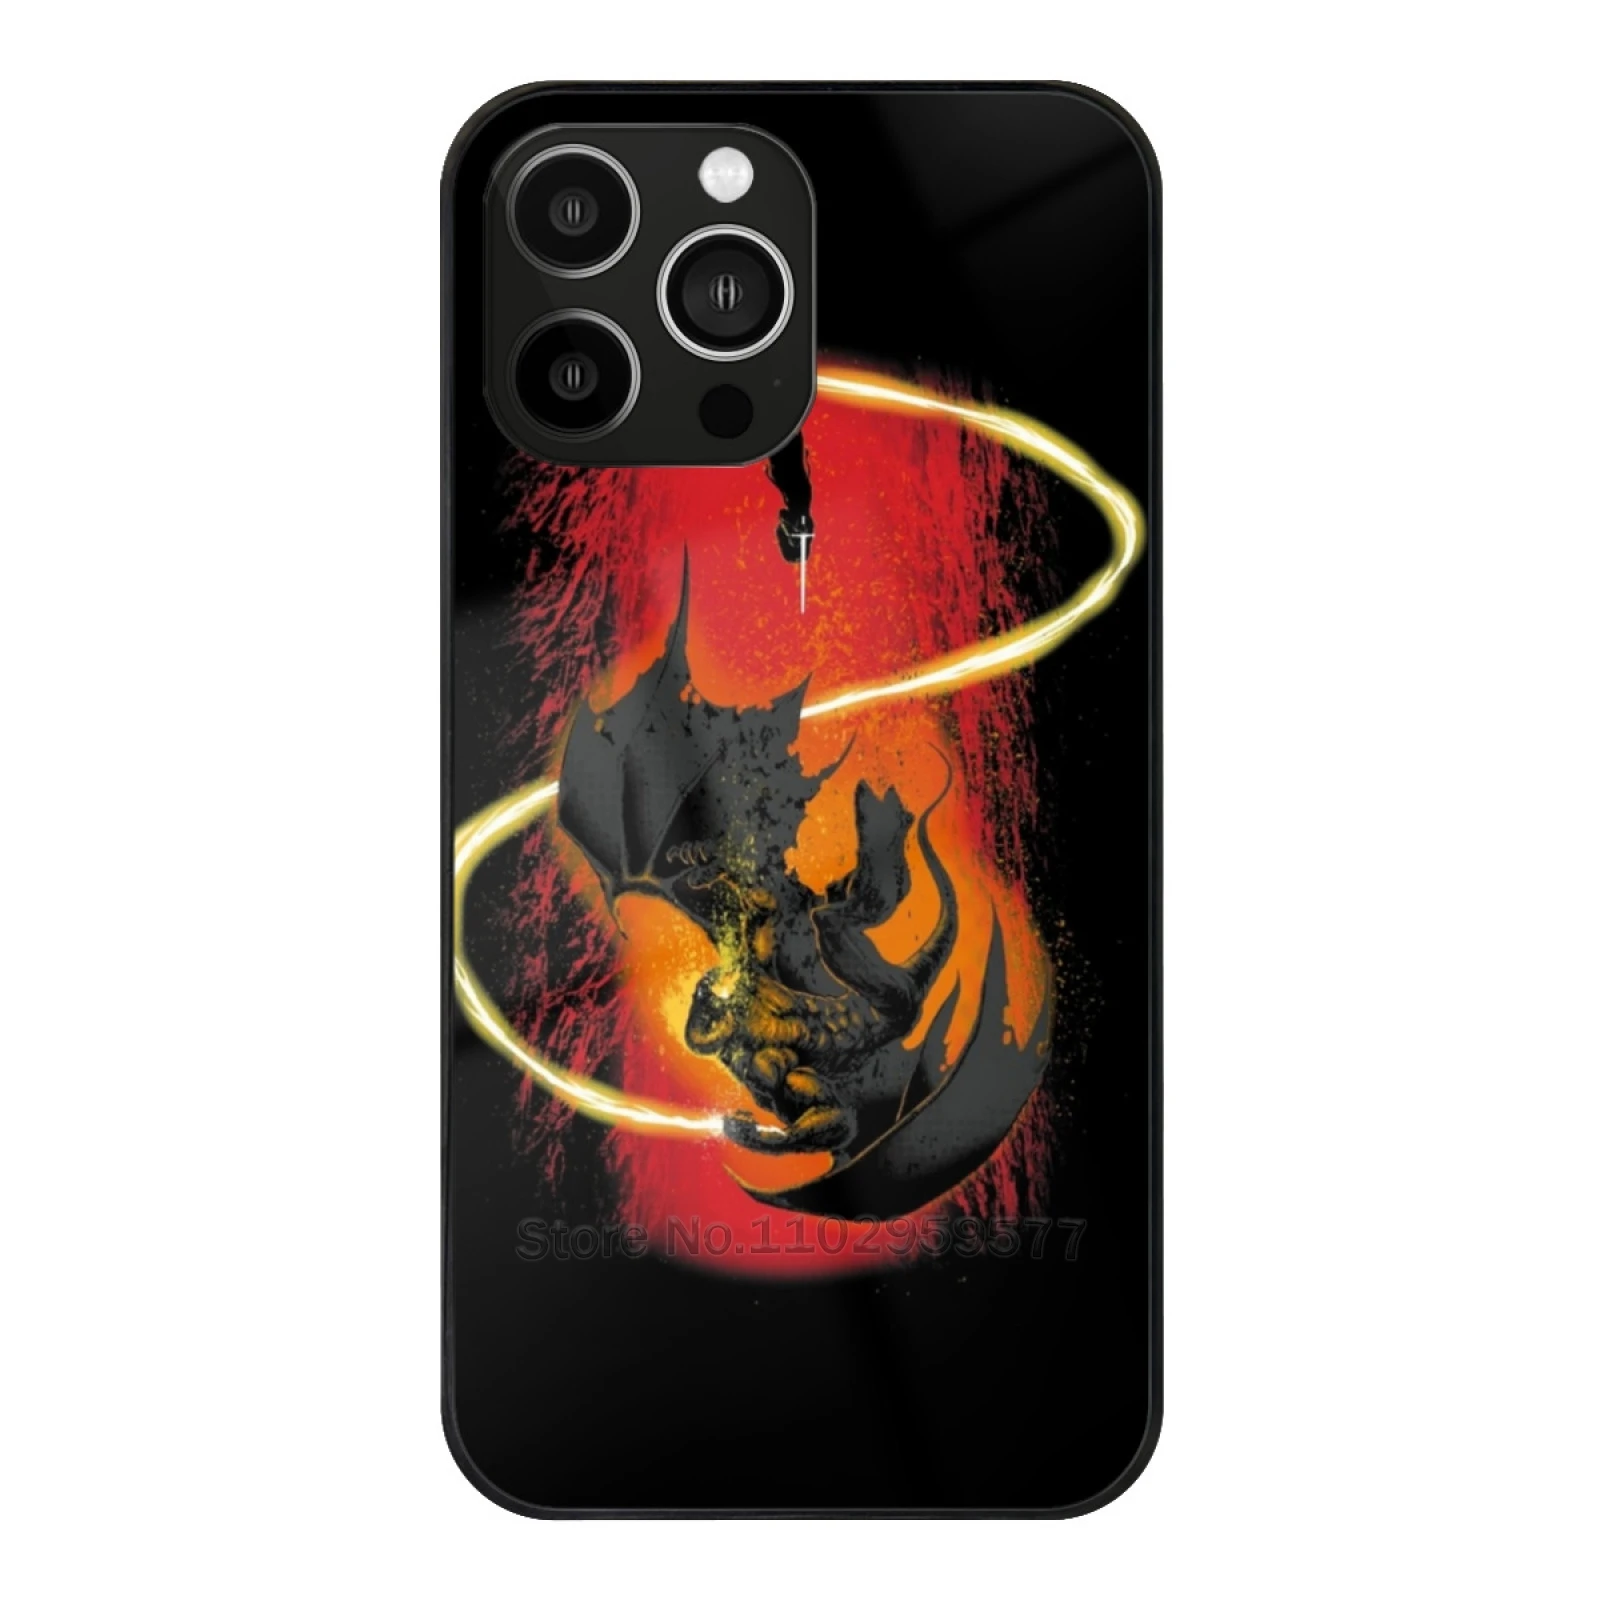 Vedlys Demonas Grūdintas Stiklas Case For Iphone 14 13Pro 12 11 Pro Max X Xr Xs 7 8 5S 6S Plius Gandalf Vedlys Demon Lord